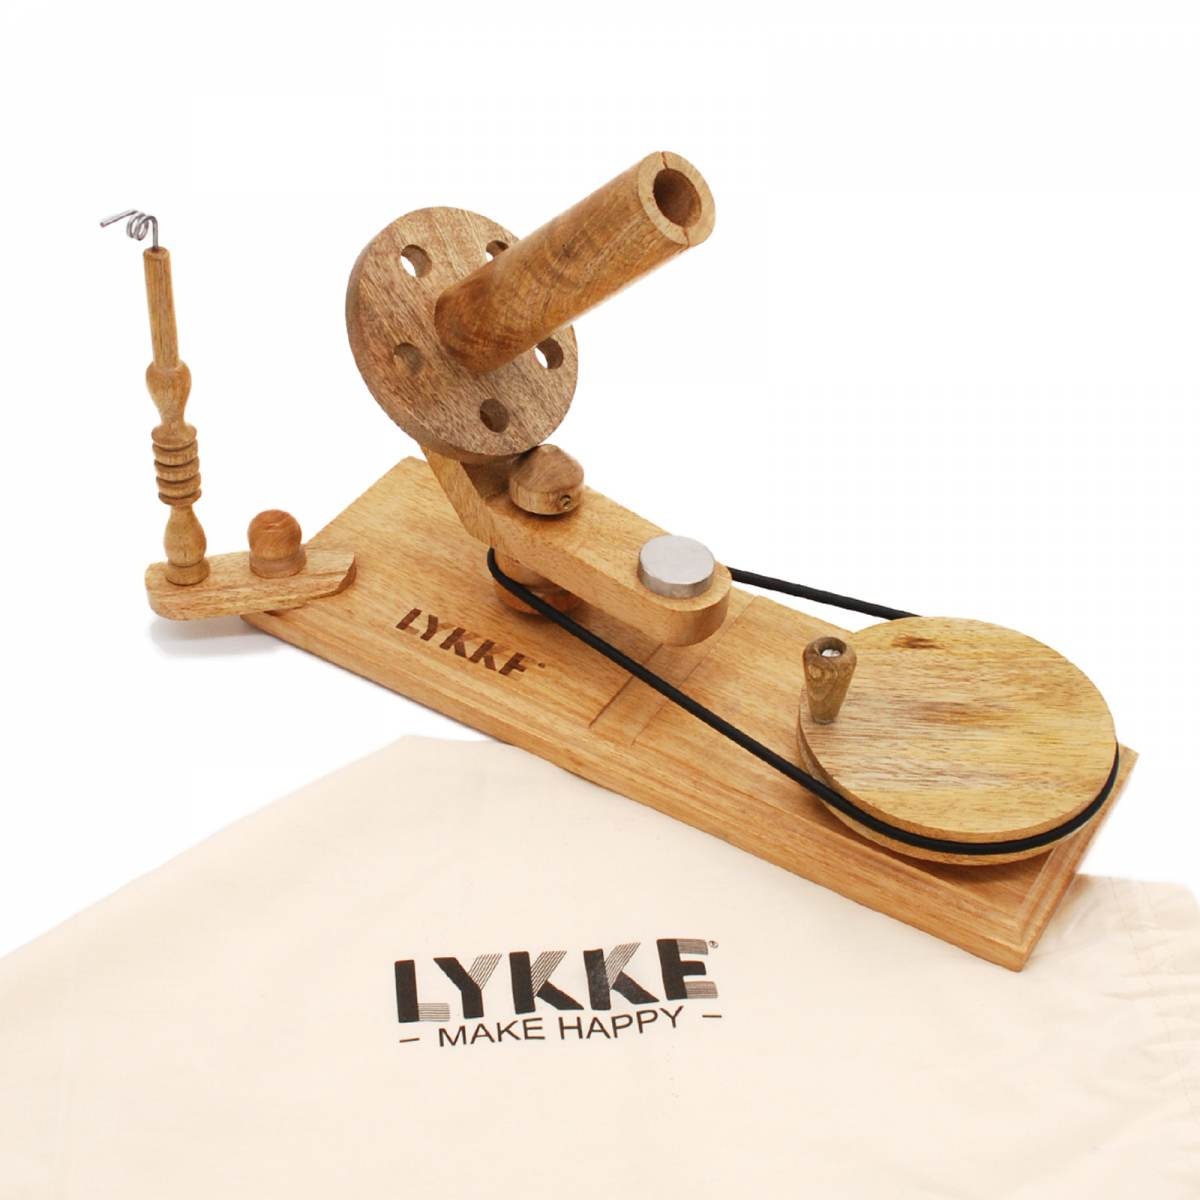 Wooden Yarn Winder for Knitting Crocheting Handcrafted, Heavy Duty Natural Ball Winder, Size: 30 cm, Brown